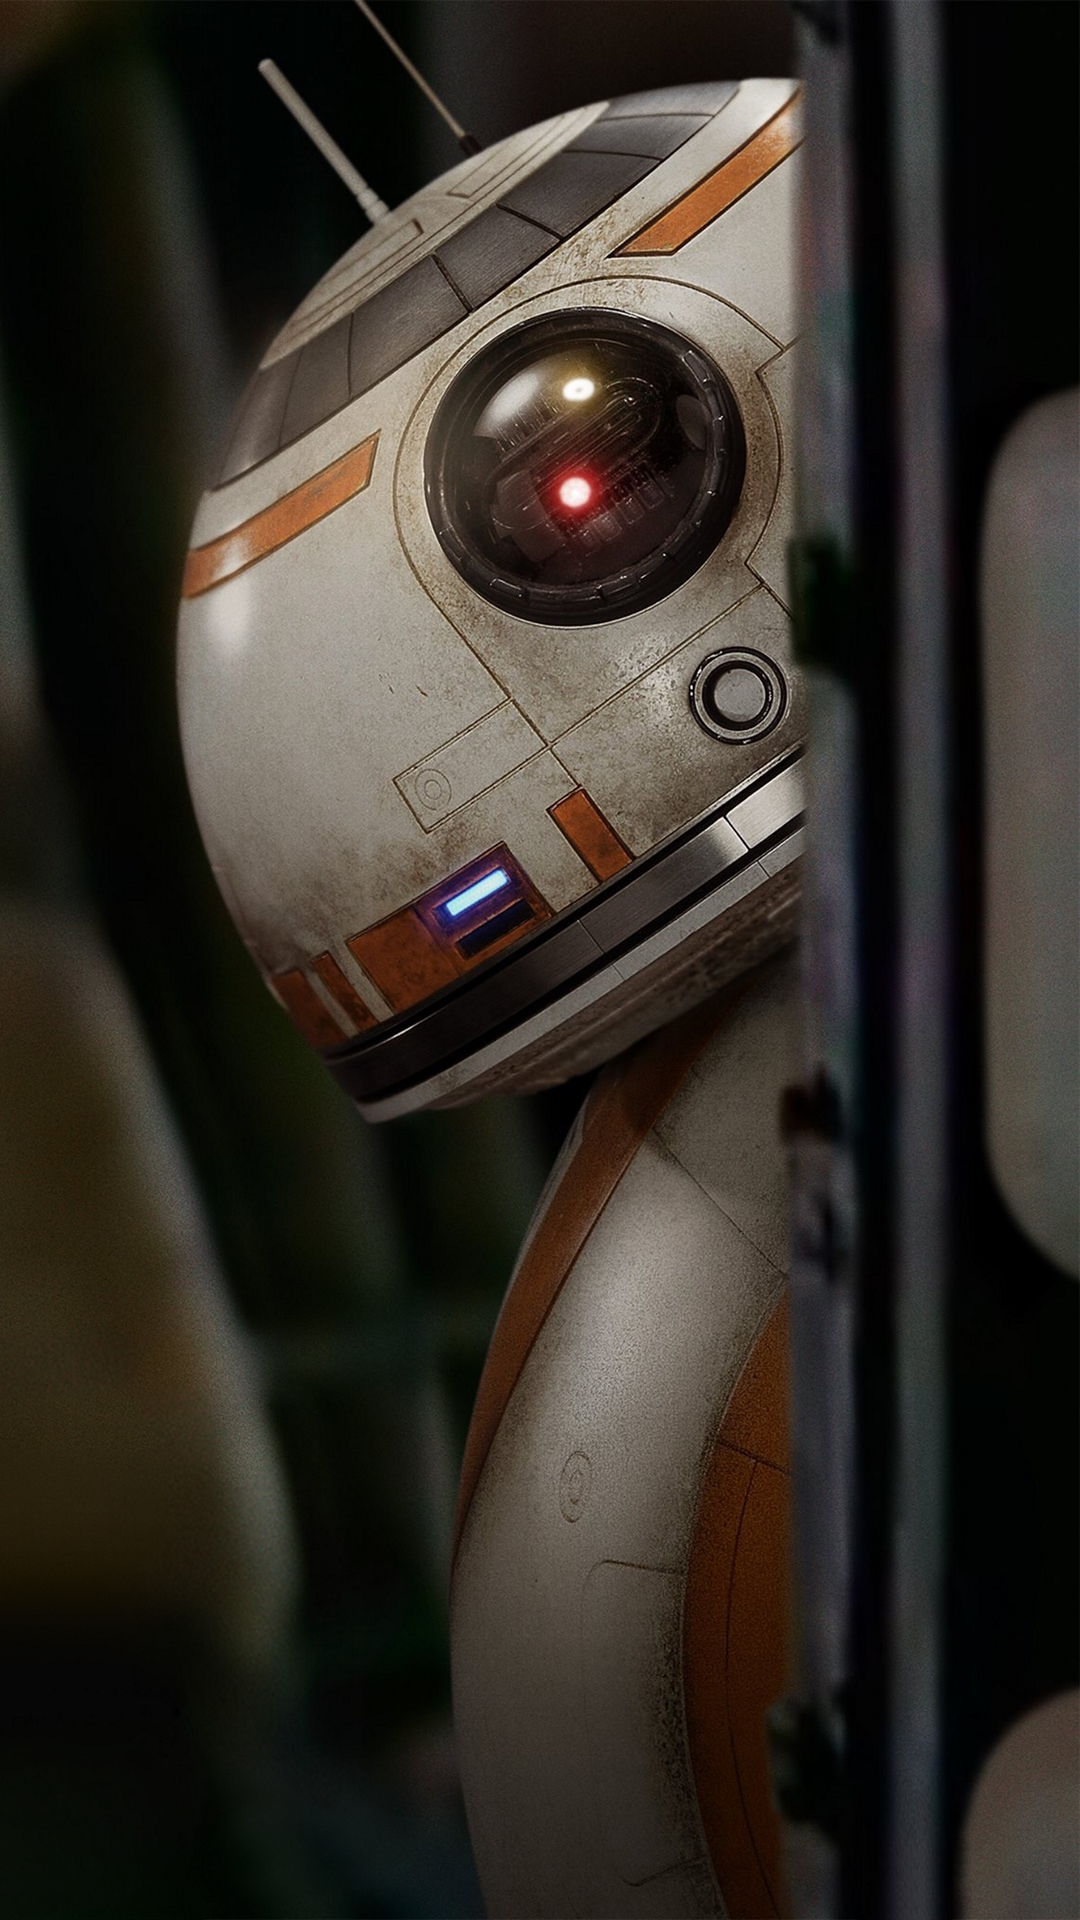 Star Wars The Force Awakens Wallpapers para iPhone 1080x1920